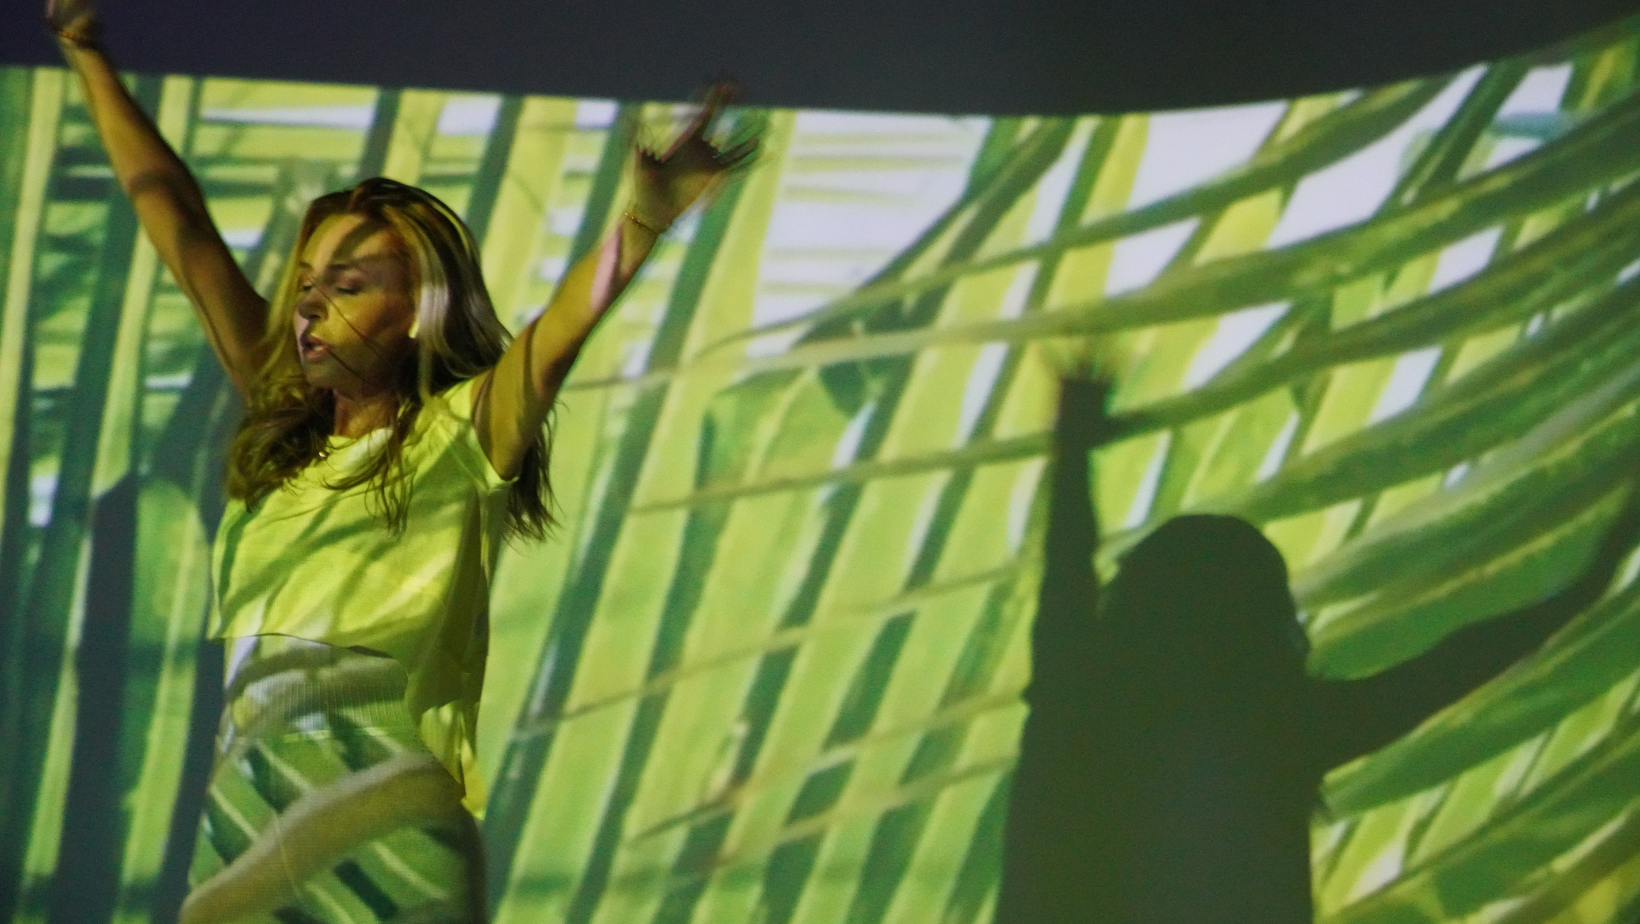 Person energetically dancing in front of a vibrant green and yellow abstract background, symbolizing rejuvenation and recovery from burnout